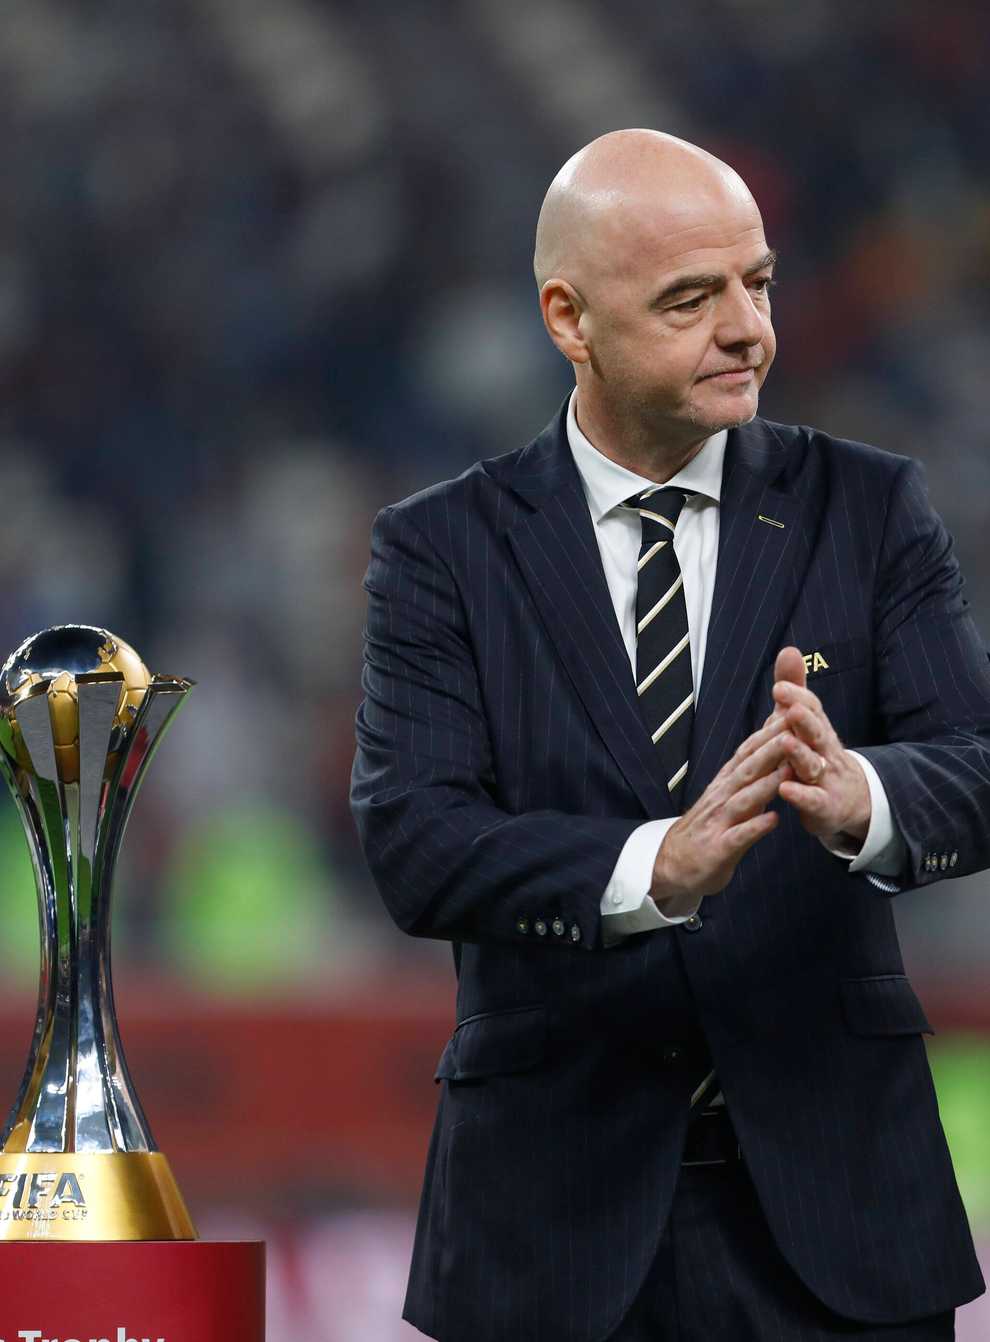 A criminal case has opened up against FIFA president Gianni Infantino